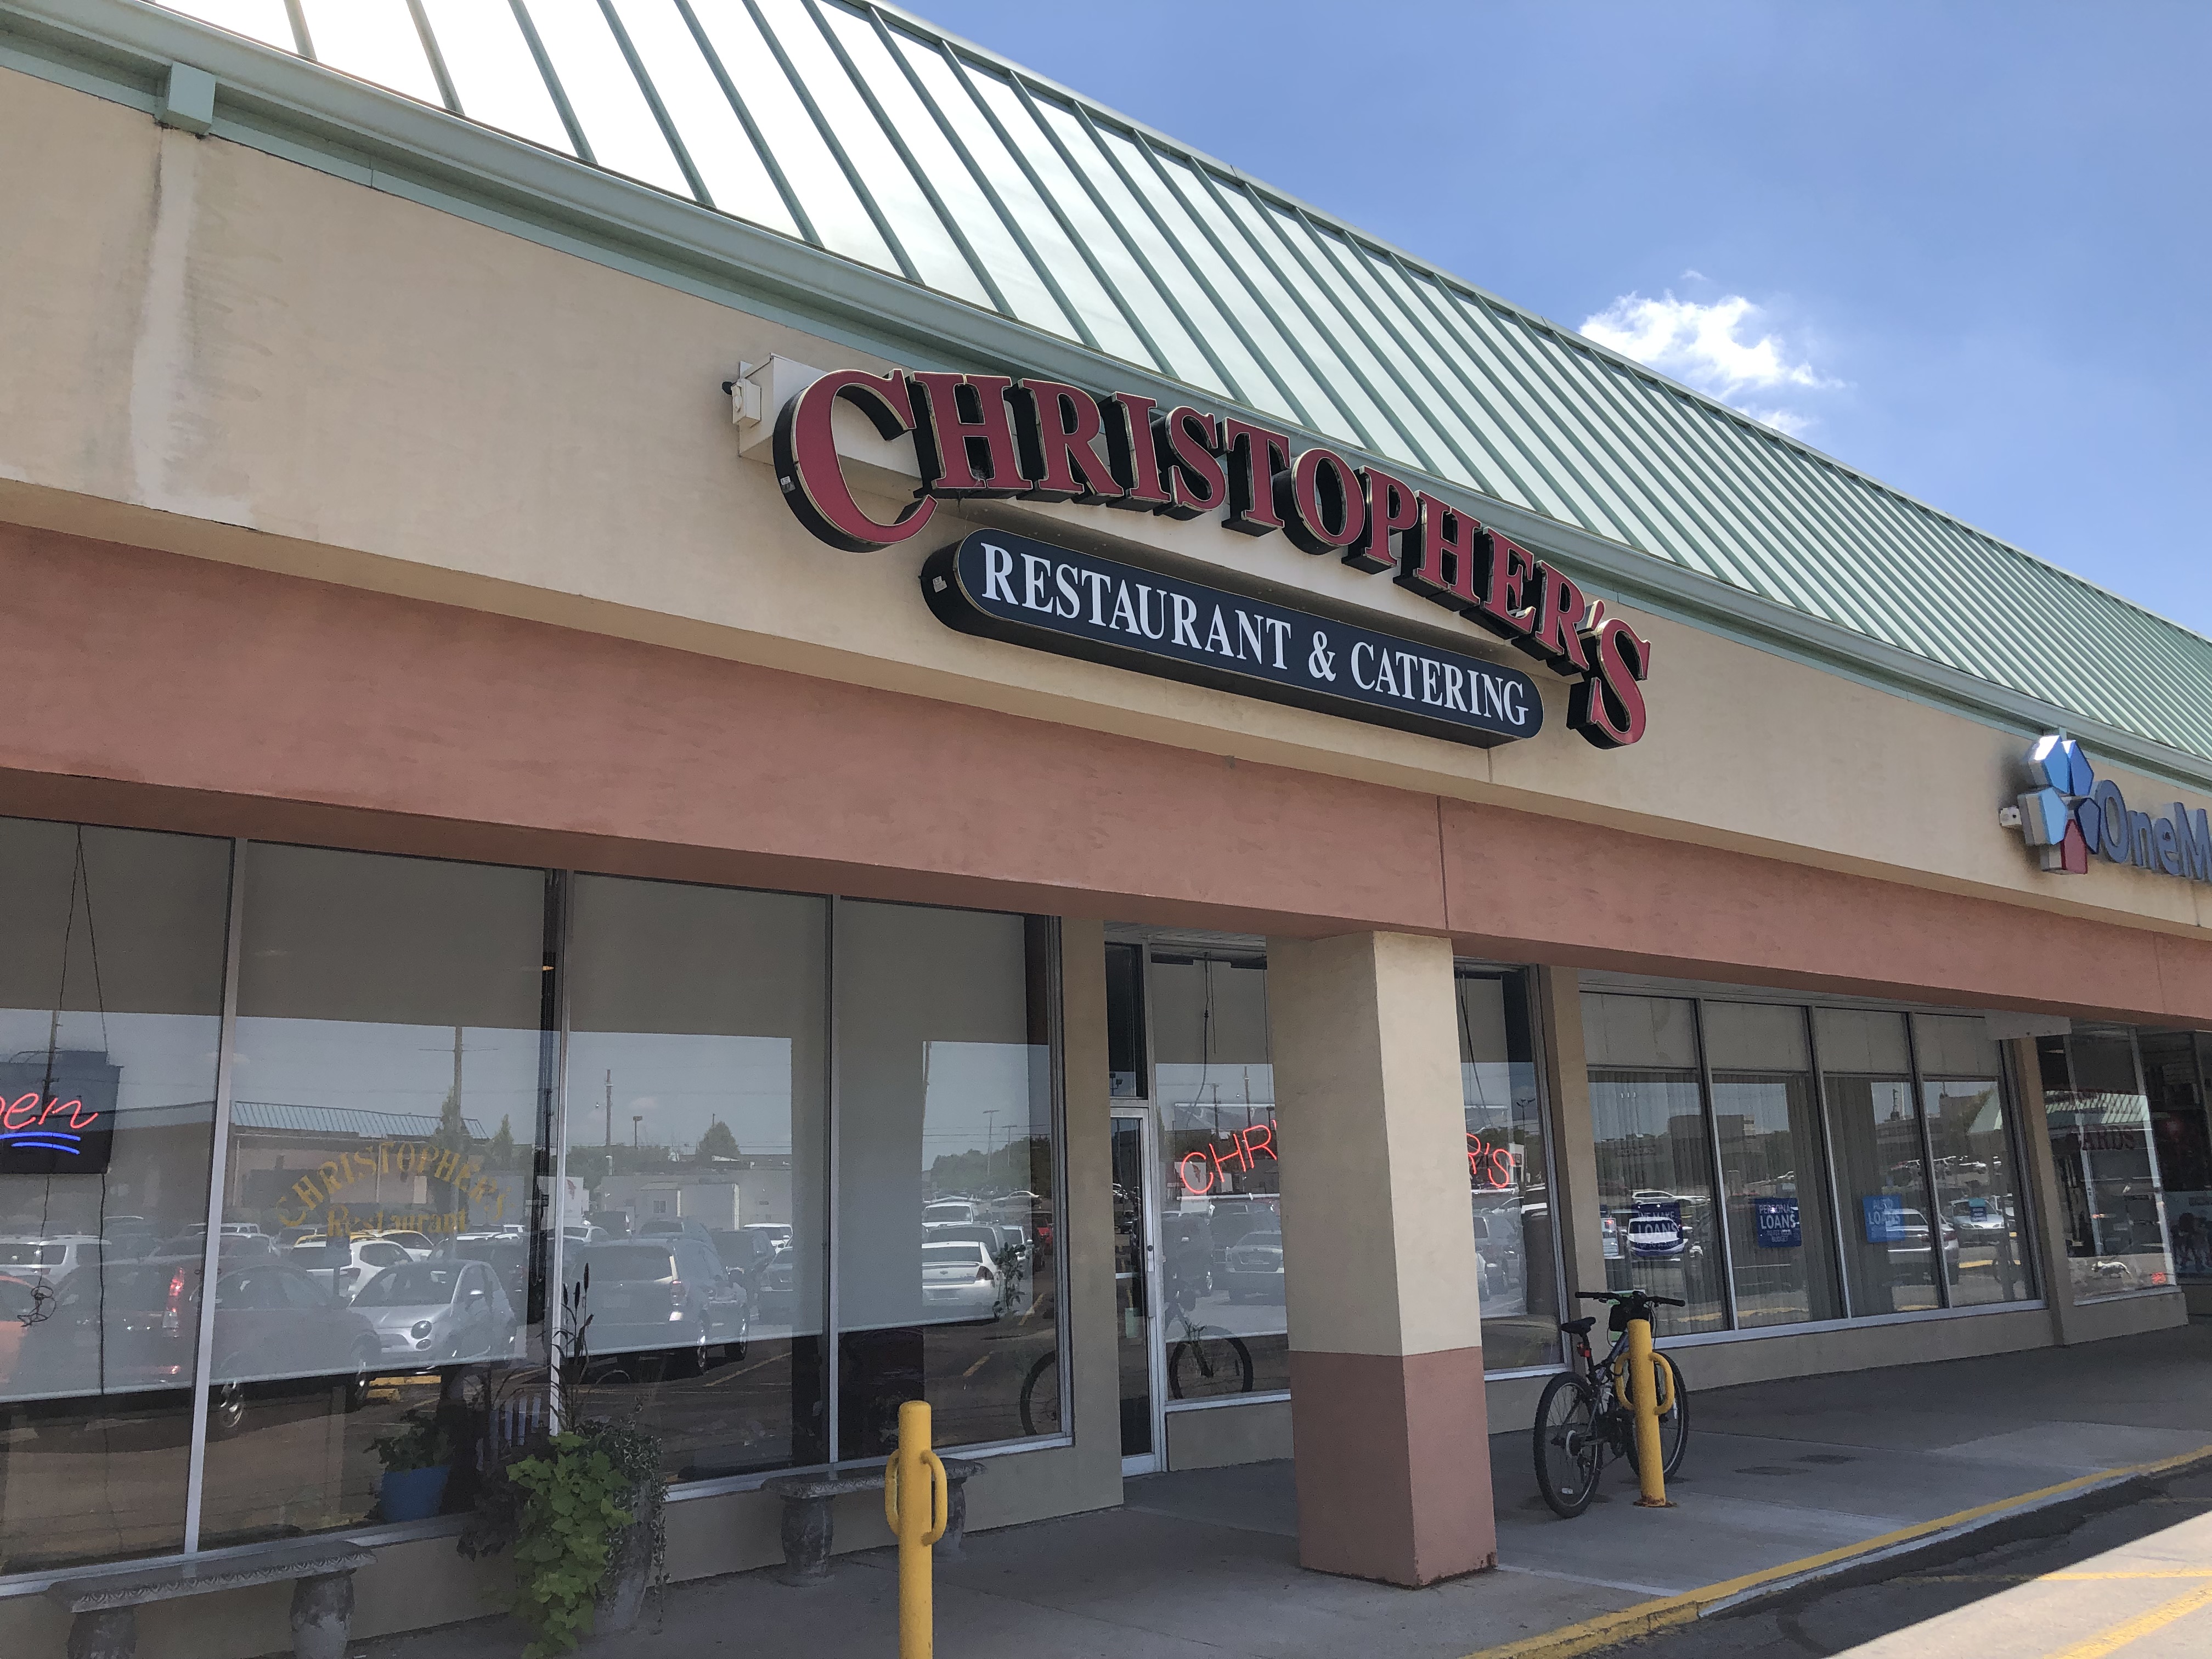 Christopher’s Restaurant, located at 2318 E. Dorothy Lane in Kettering, closed on June 15 after being “unable to reach mutually agreeable terms” to renew their lease with their landlord, according to a letter the owners posted on the restaurant’s Facebook page. CONTRIBUTED